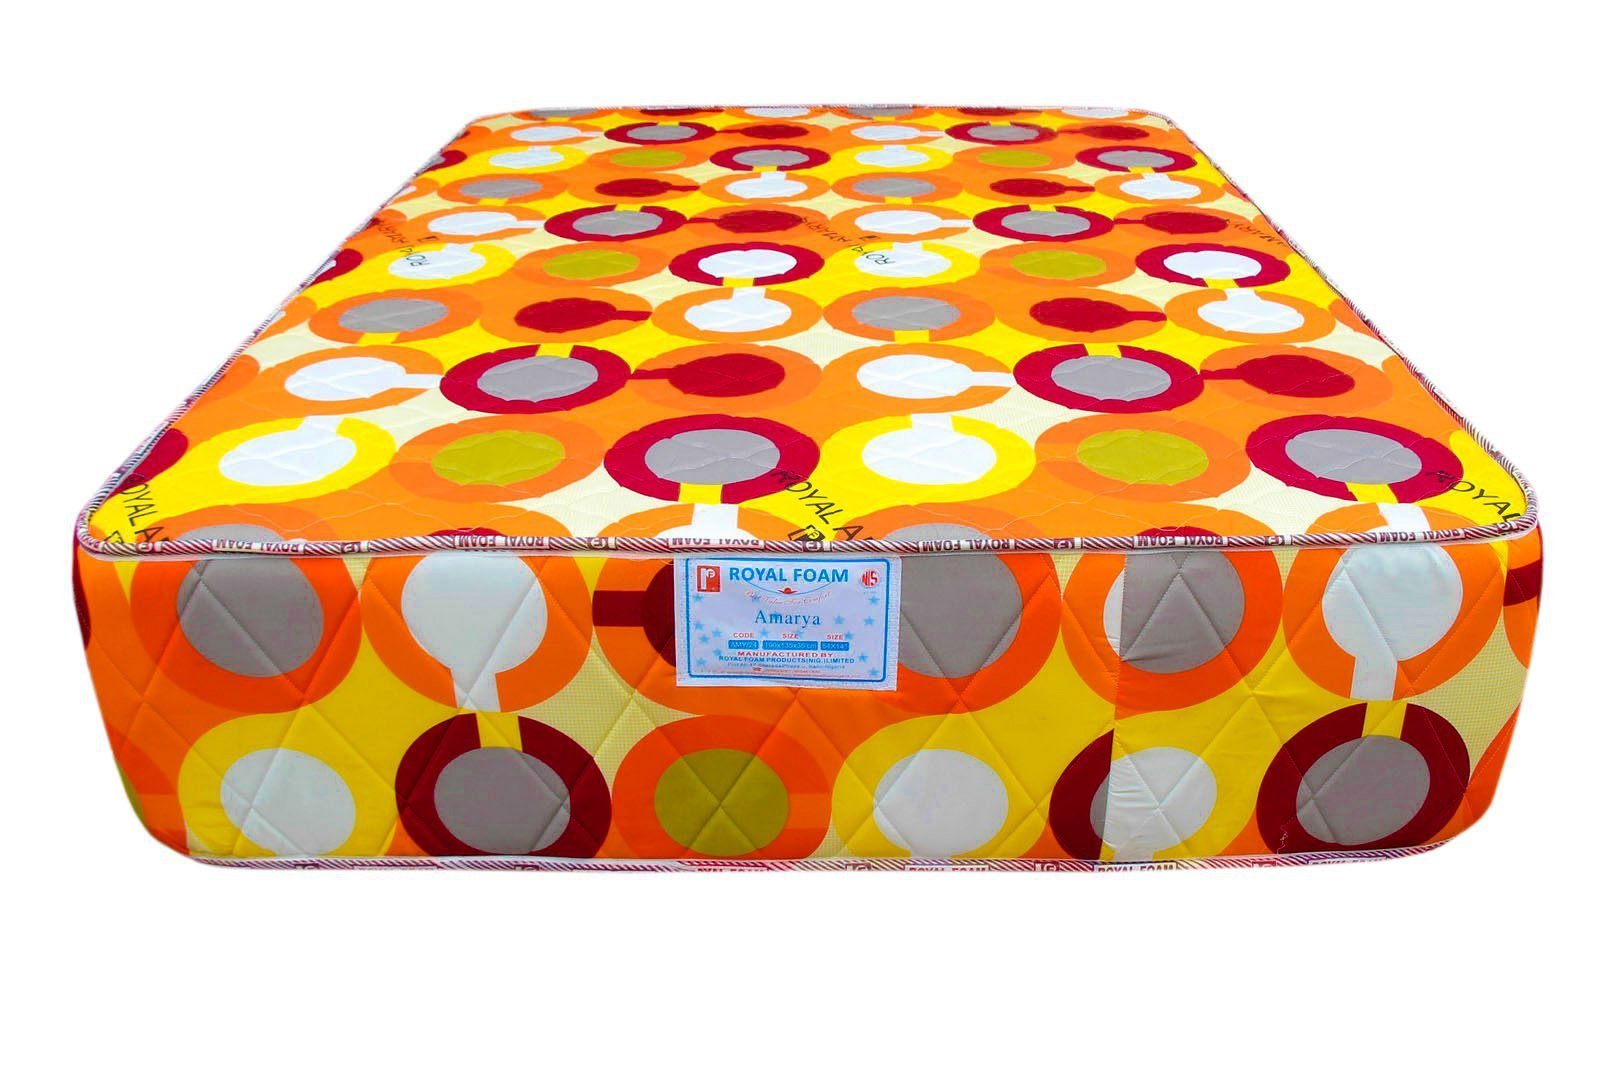 Royal Amarya-Poly Cotton Fabric - 14 Density foam - Fully Quilted Mattress -190X105X30CM [75 x 42 x 12"] [6ft x 3.4ft x 12inches]